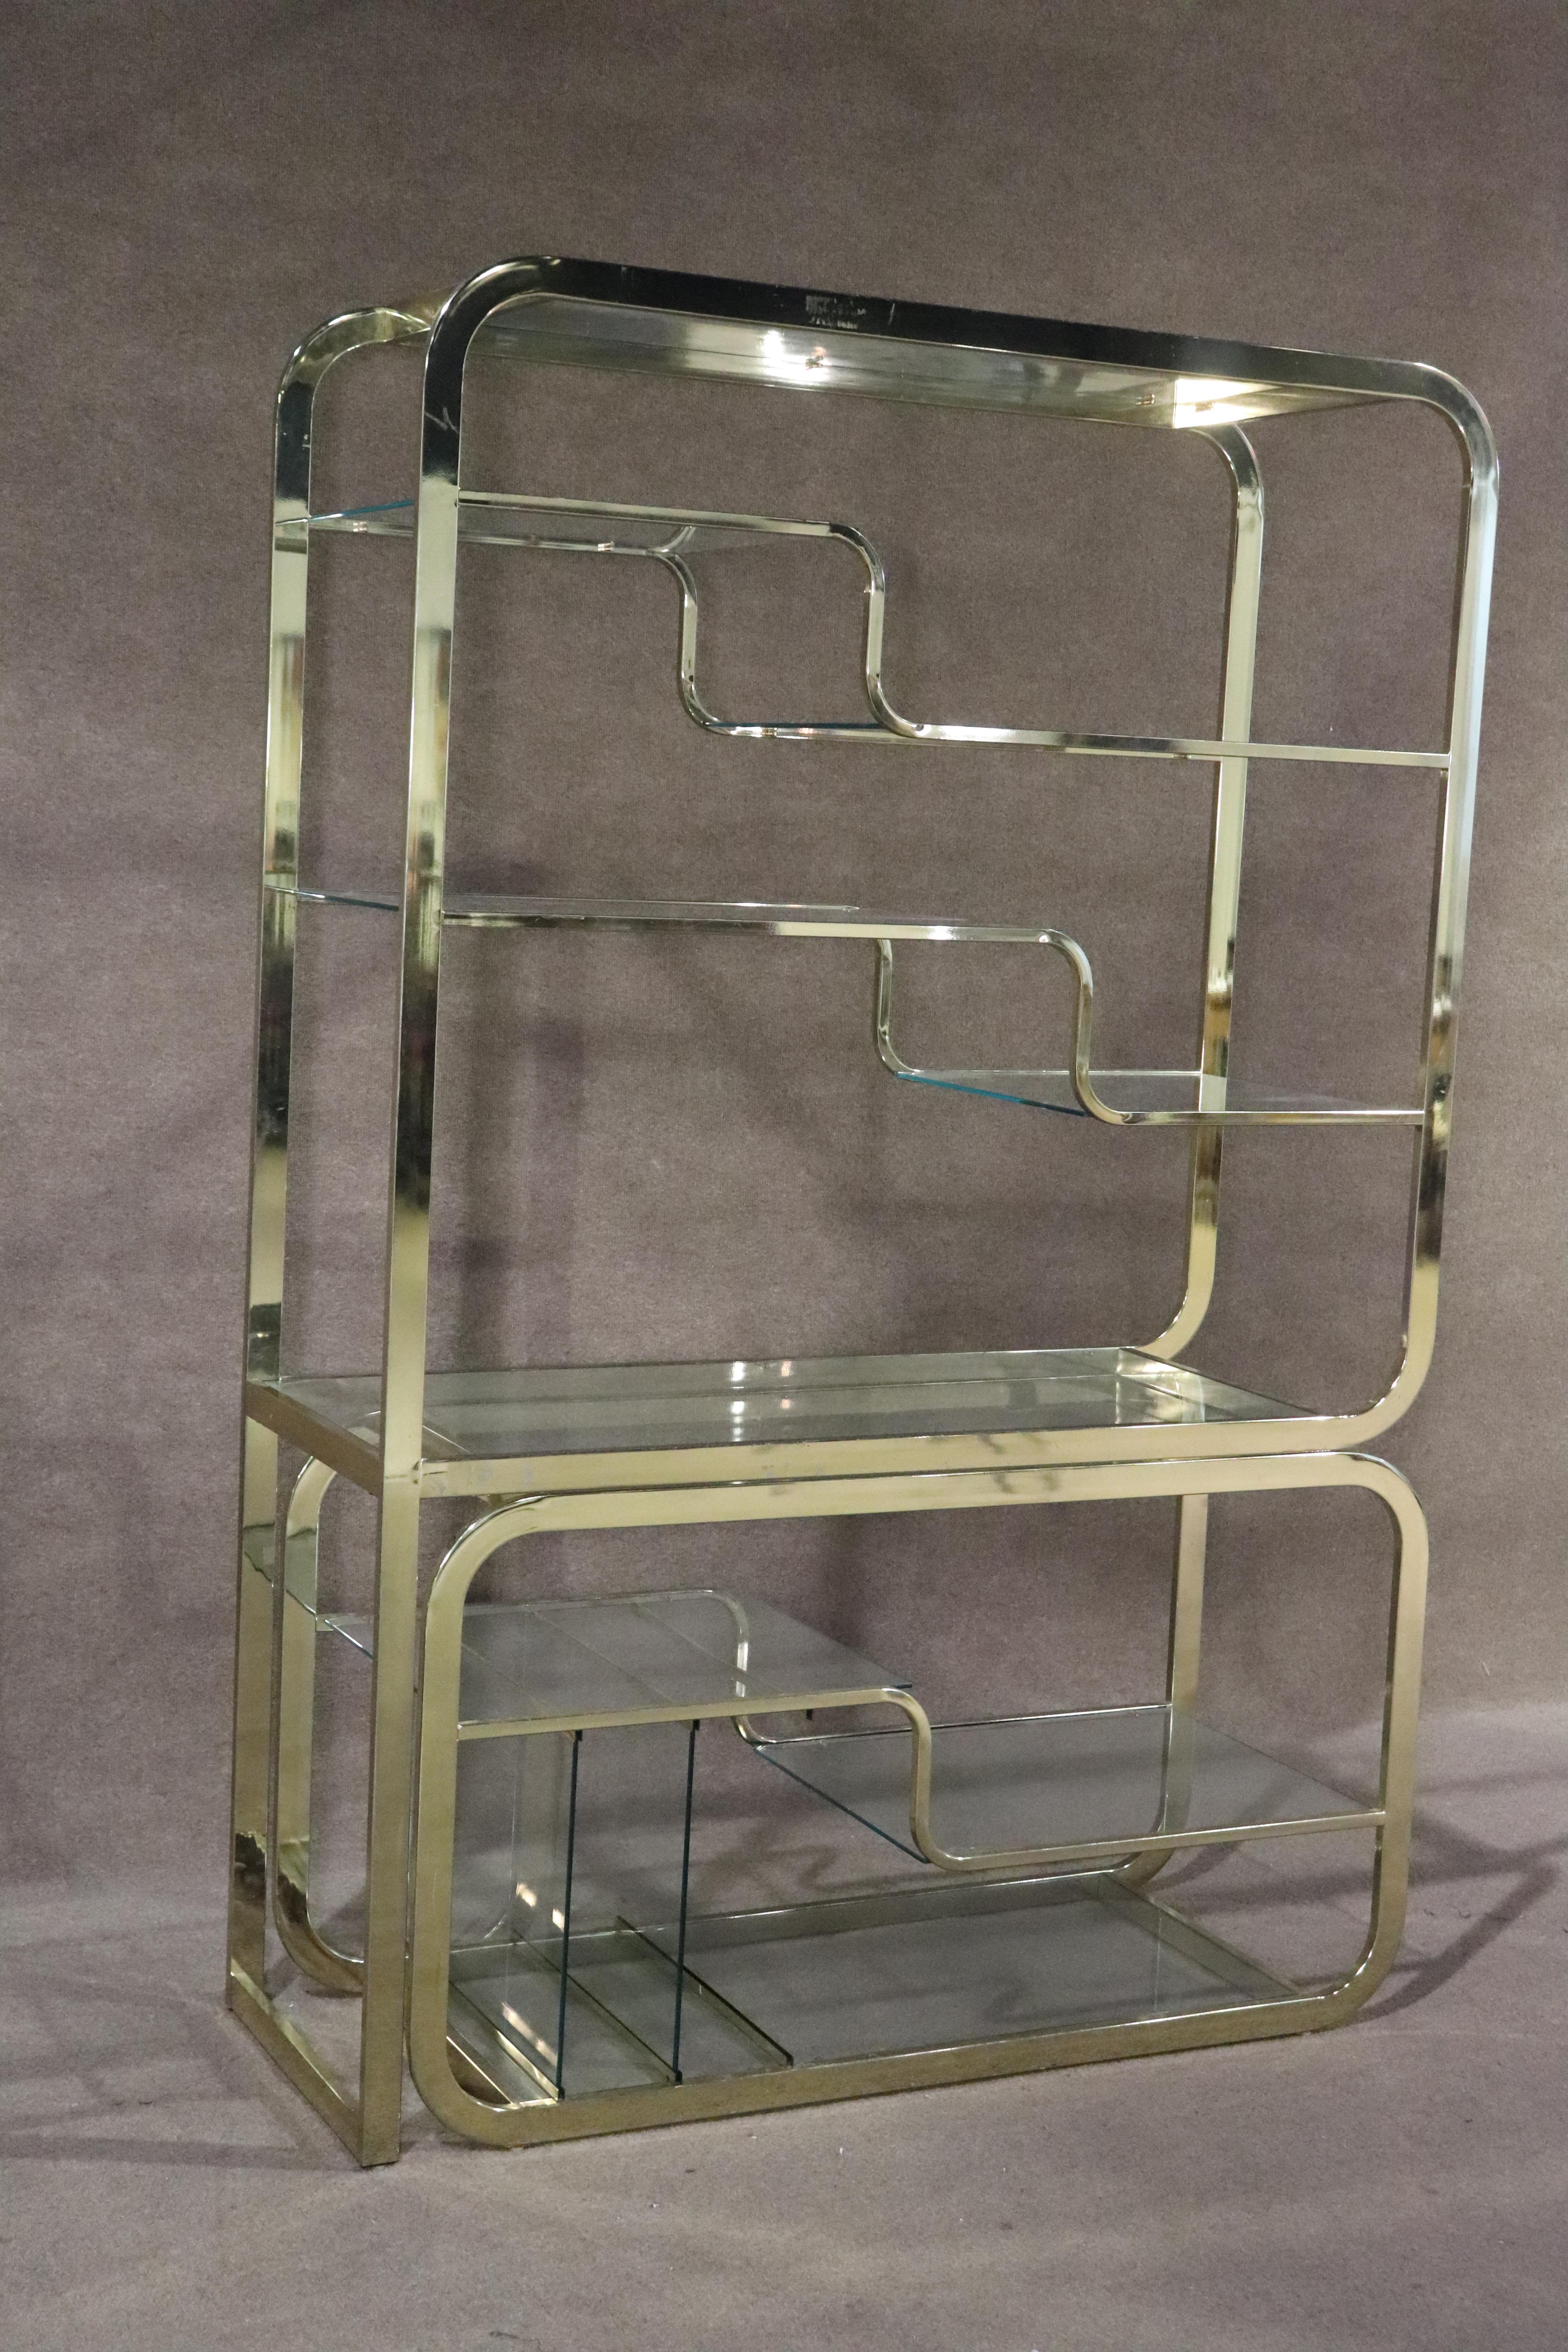 Vintage polished brass etagere unit with movable base. This makes a great see through room divider, with bookcase on top and dry bar storage on the bottom.
Please confirm location NY or NJ